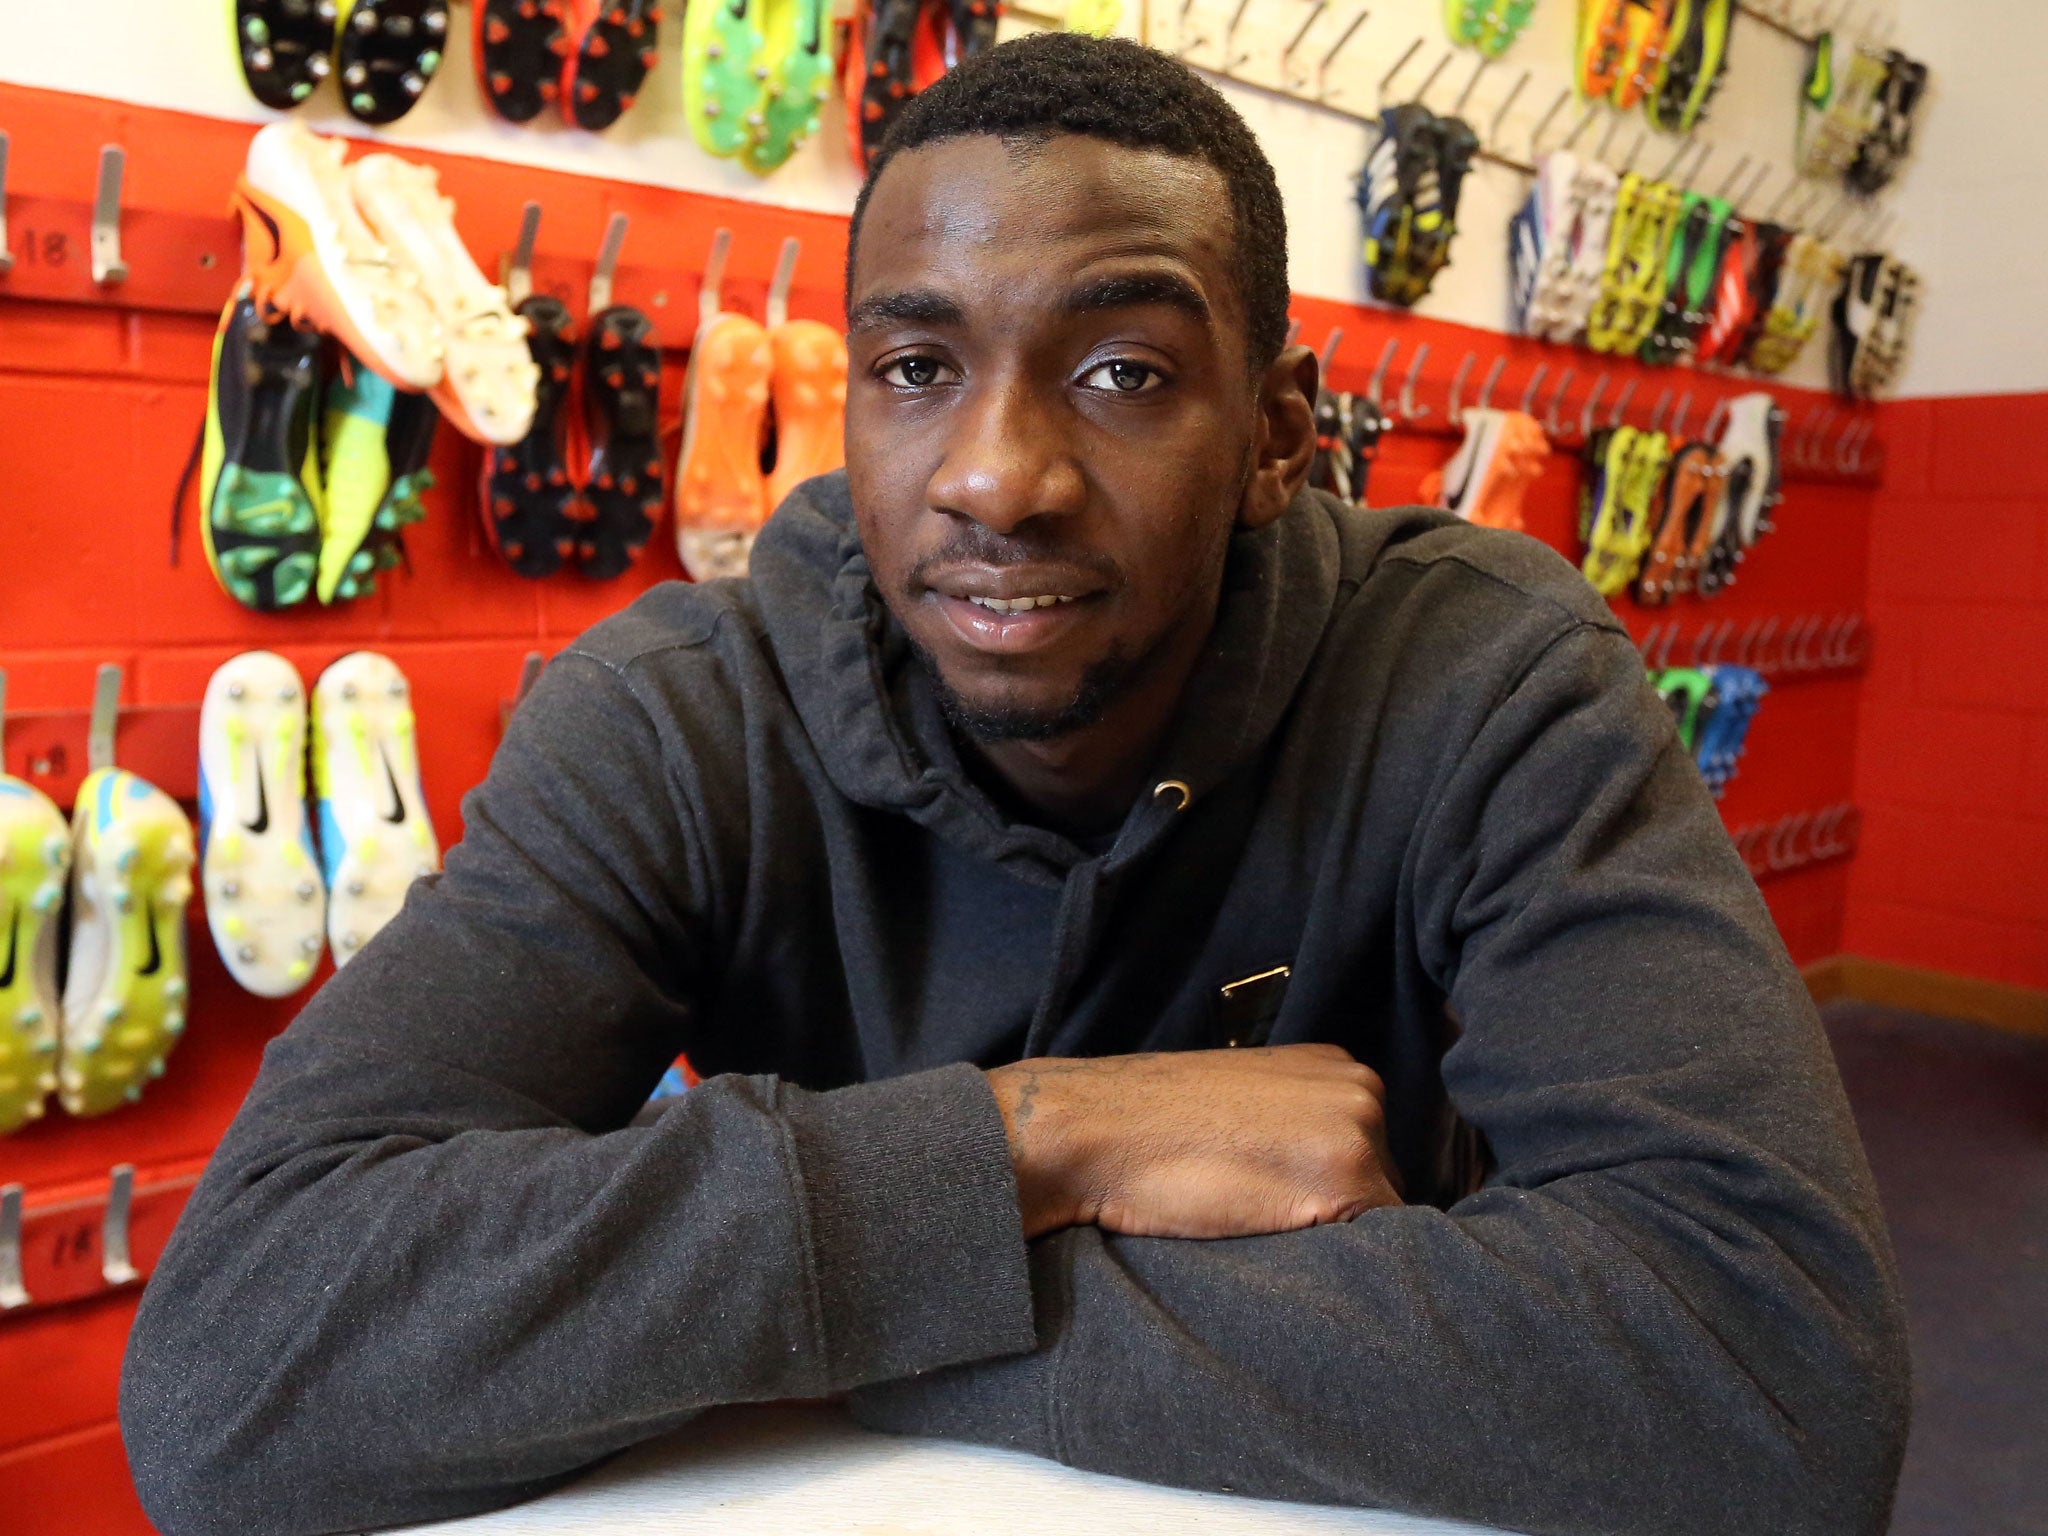 Yannick Bolasie in the Crystal Palace boot room